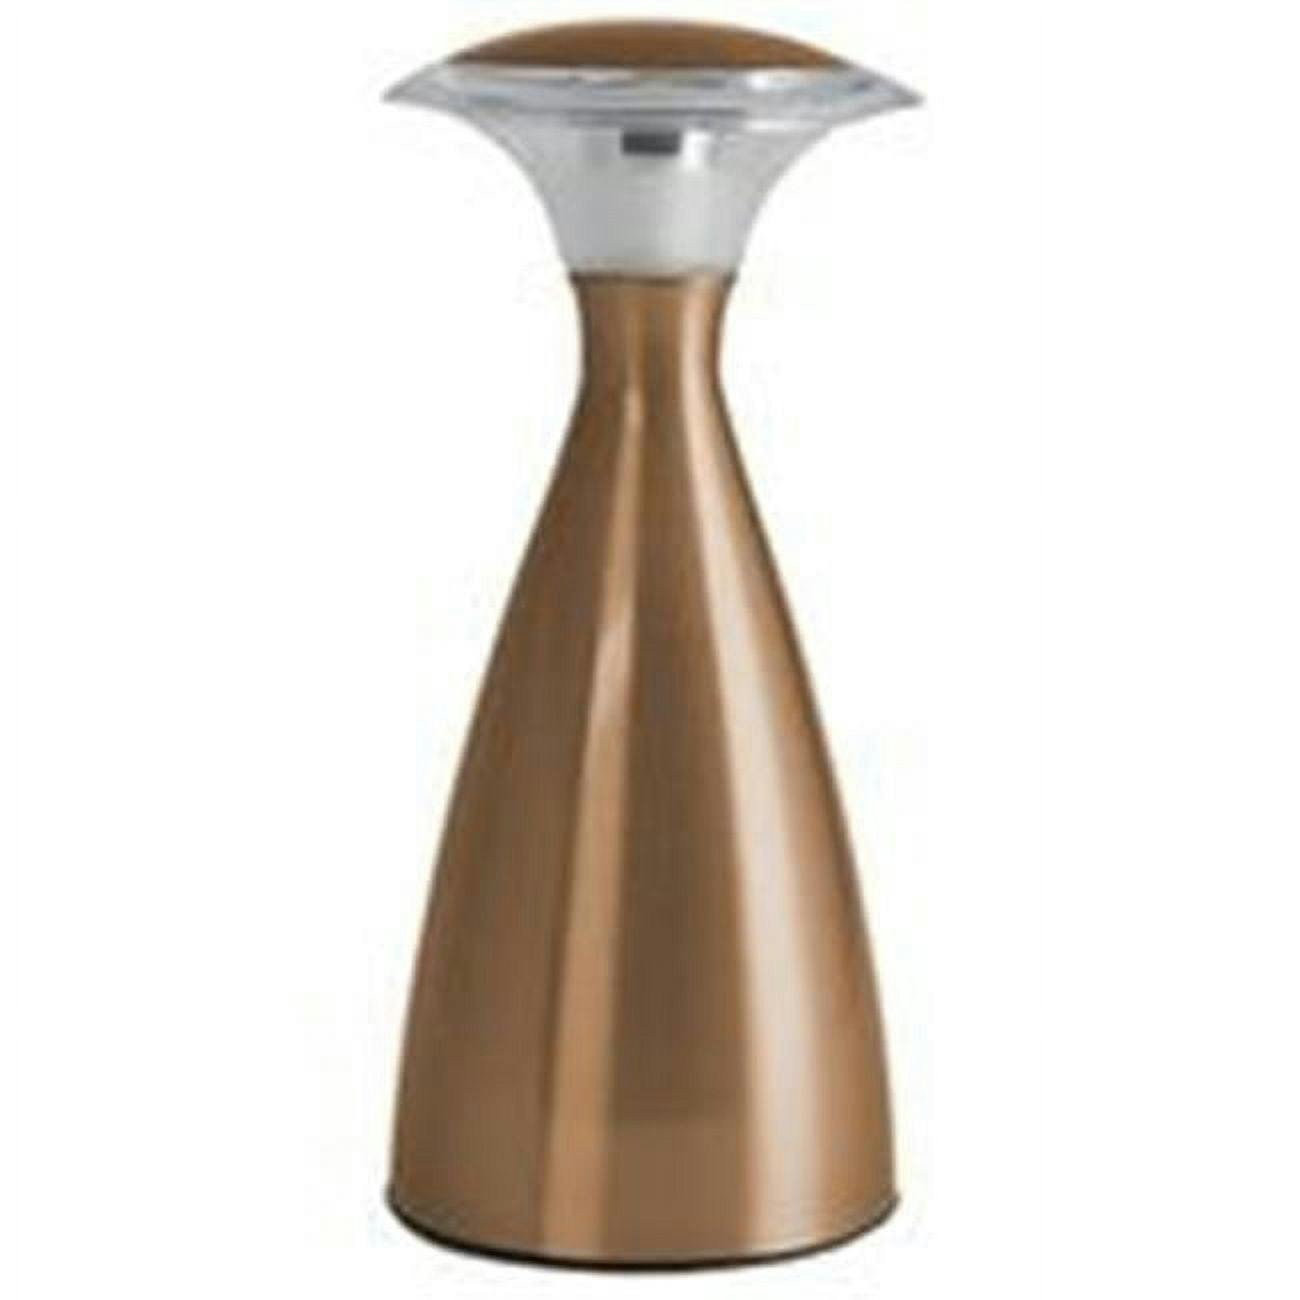 Copper Touch Lantern LUX Cordless Lamp for Outdoor & Nursery